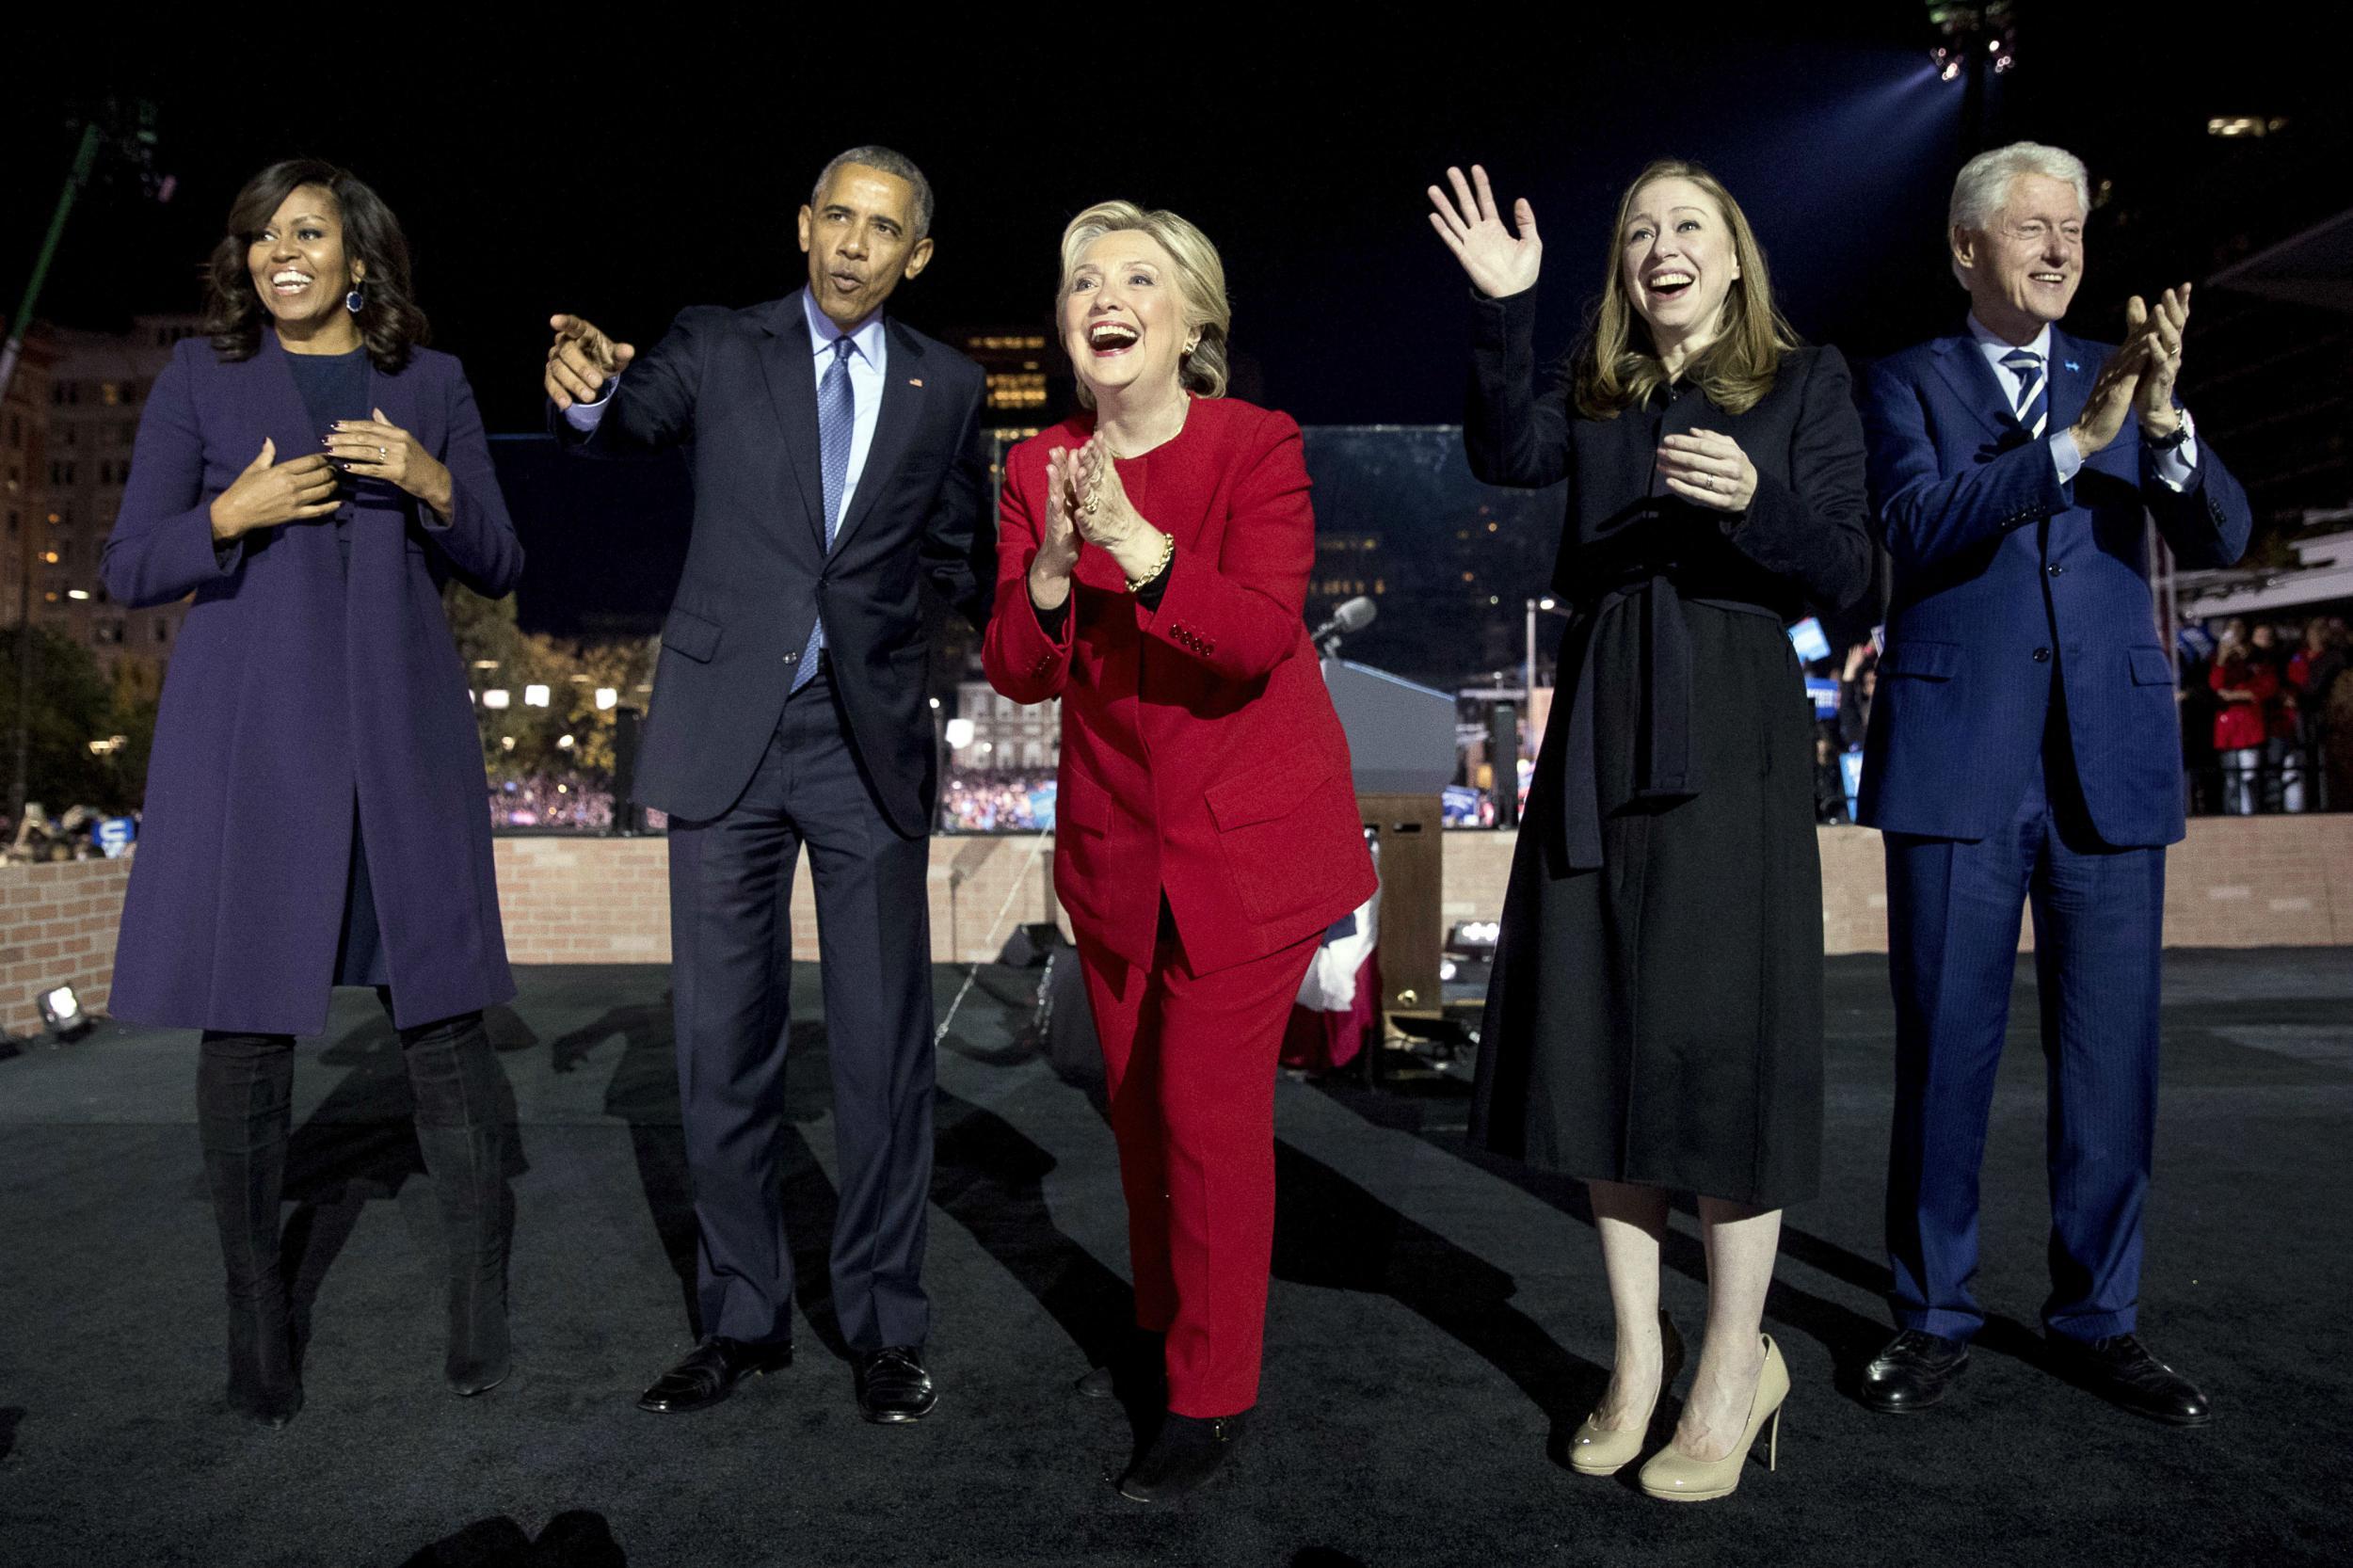 Ms Clinton was joined by her husband and daughter, and the president and the first lady